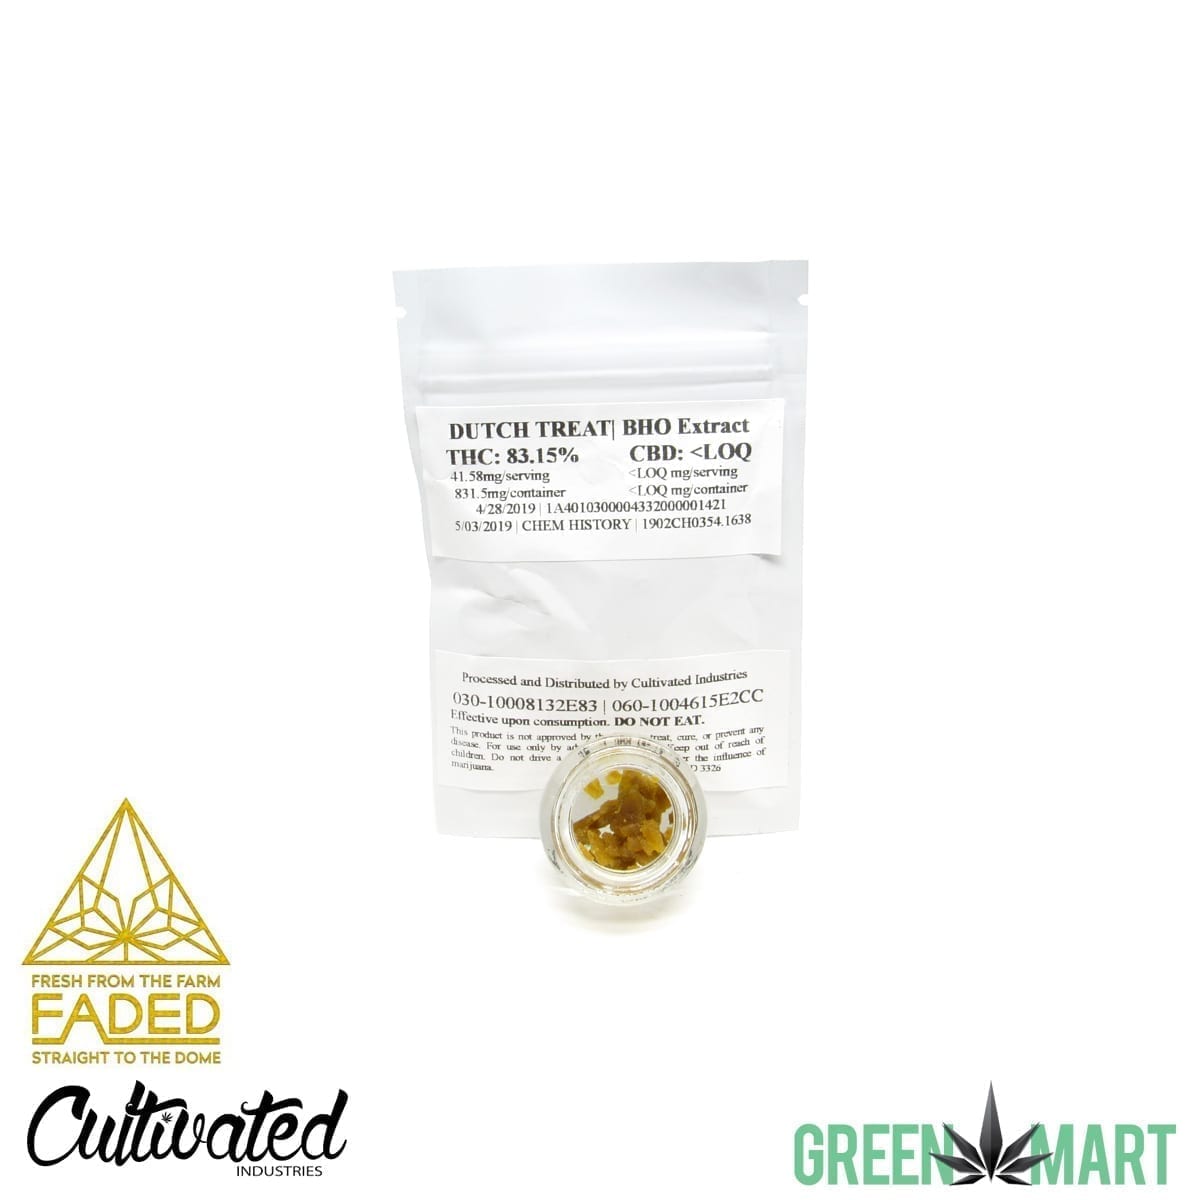 Faded by Cultivated Industries - Dutch Treat